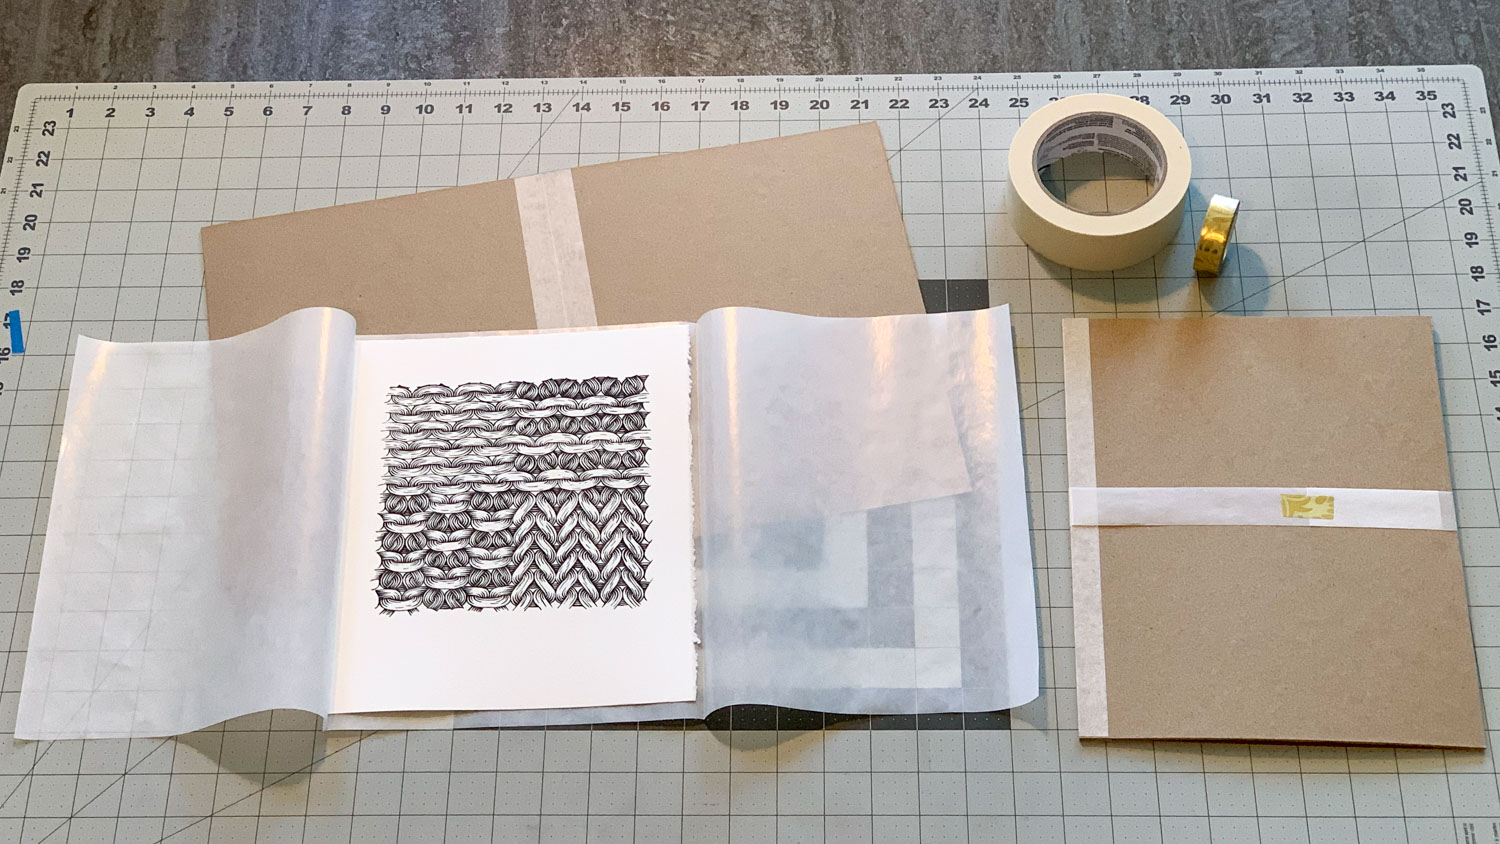 Packing materials laid out across a table. On the left is an open chipboard folder, on top of which is placed a tri-fold sheet of semi-transparent glassine paper folded around a sheep print. To the right is a closed chipboard folder fastened with a glassine belly band.